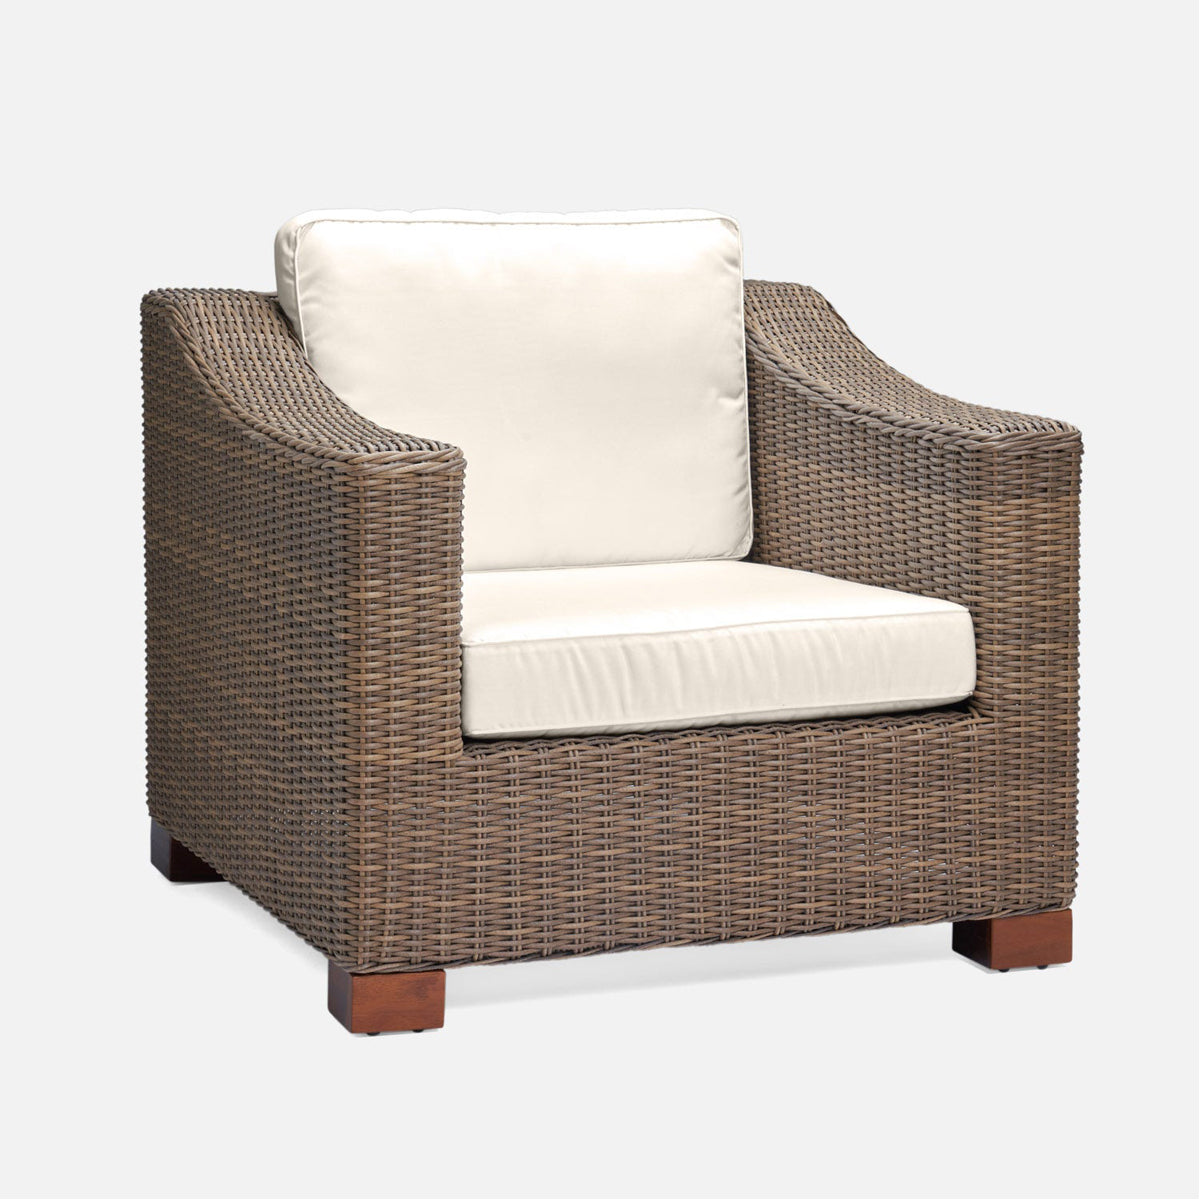 Made Goods Marina Outdoor Lounge Chair with Cushions in Alsek Fabric